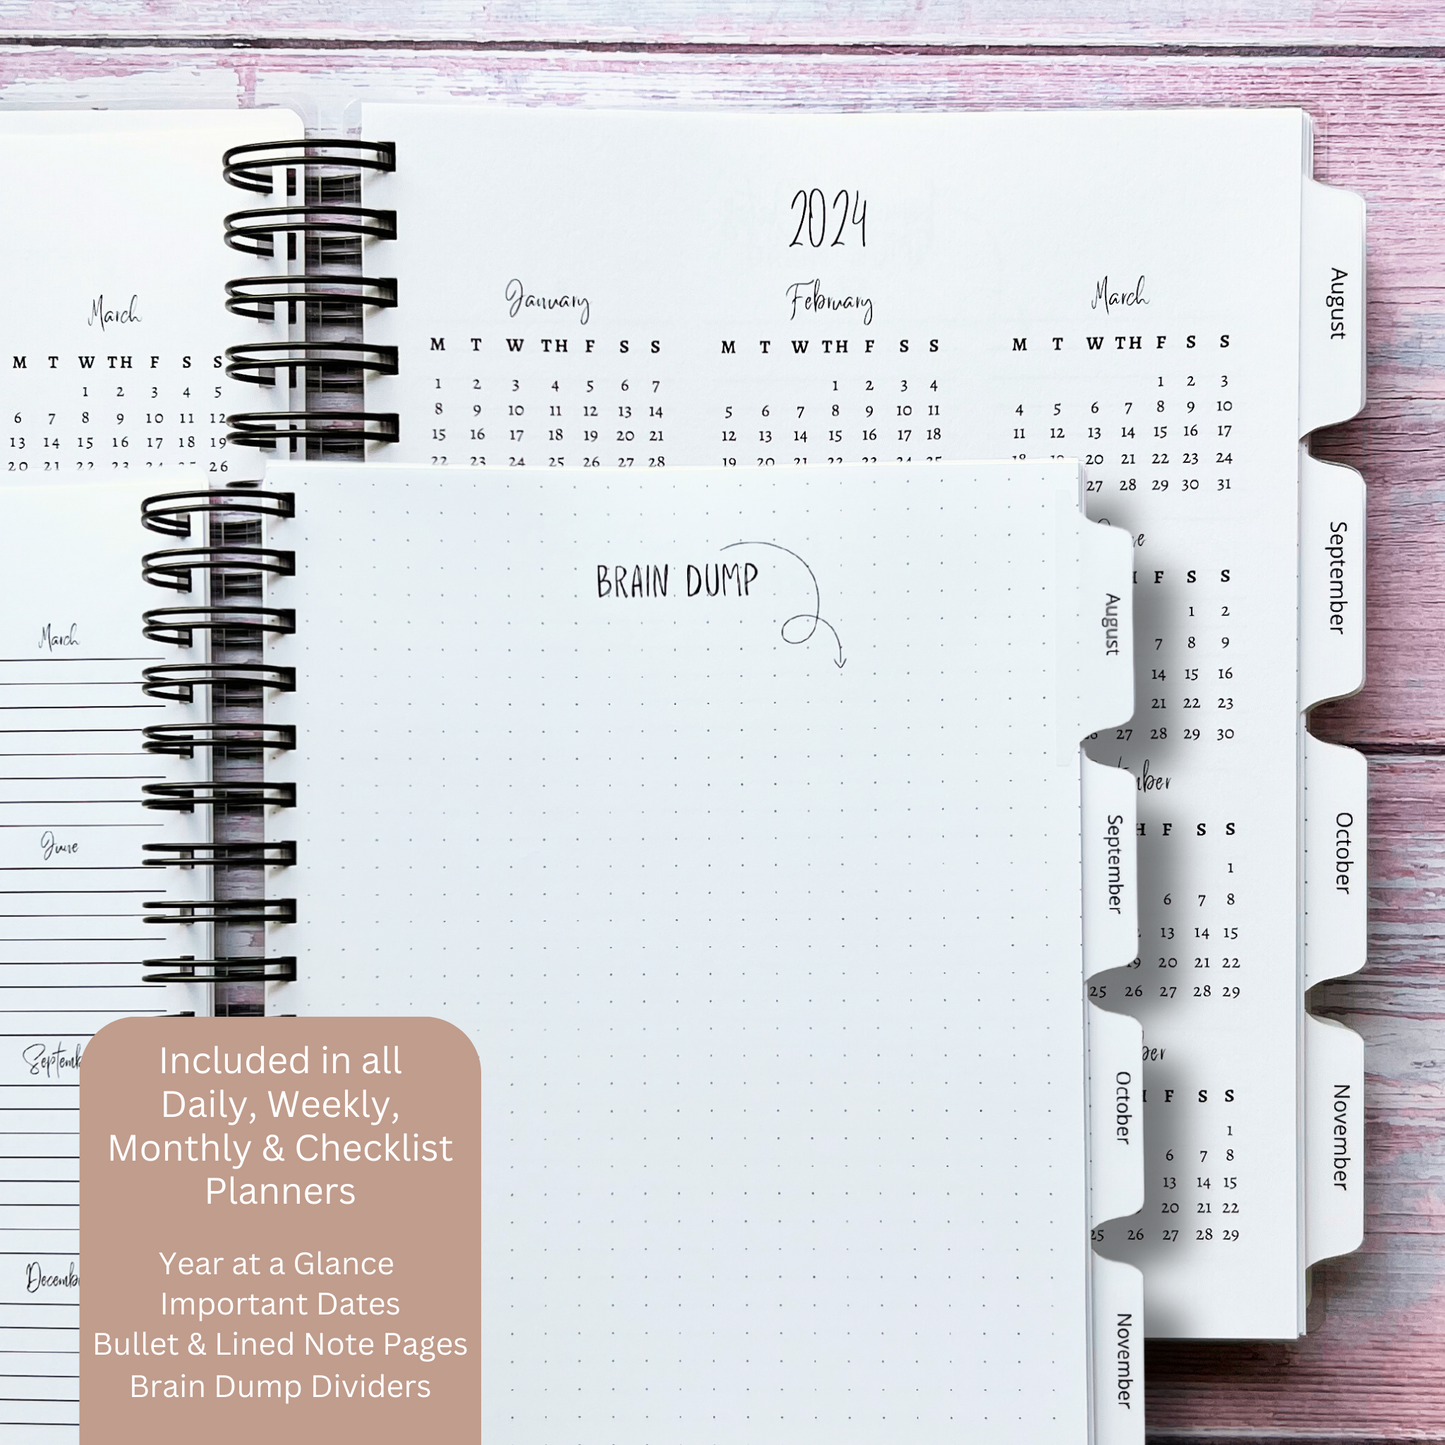 Magical Garden Personalized Planner